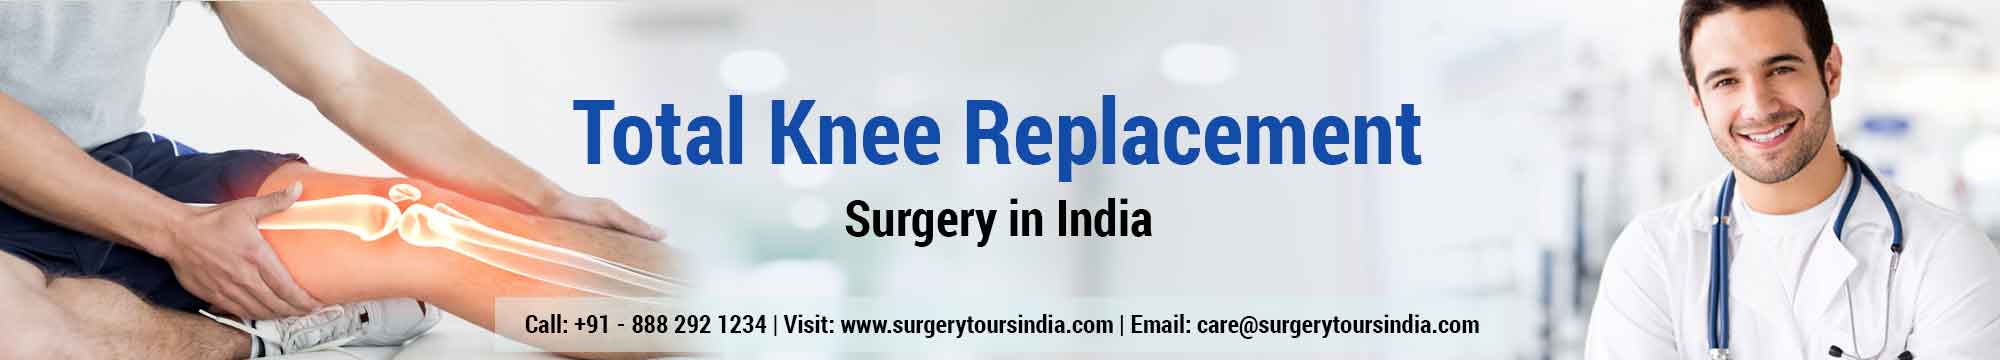 Total Knee Replacement Surgery In India